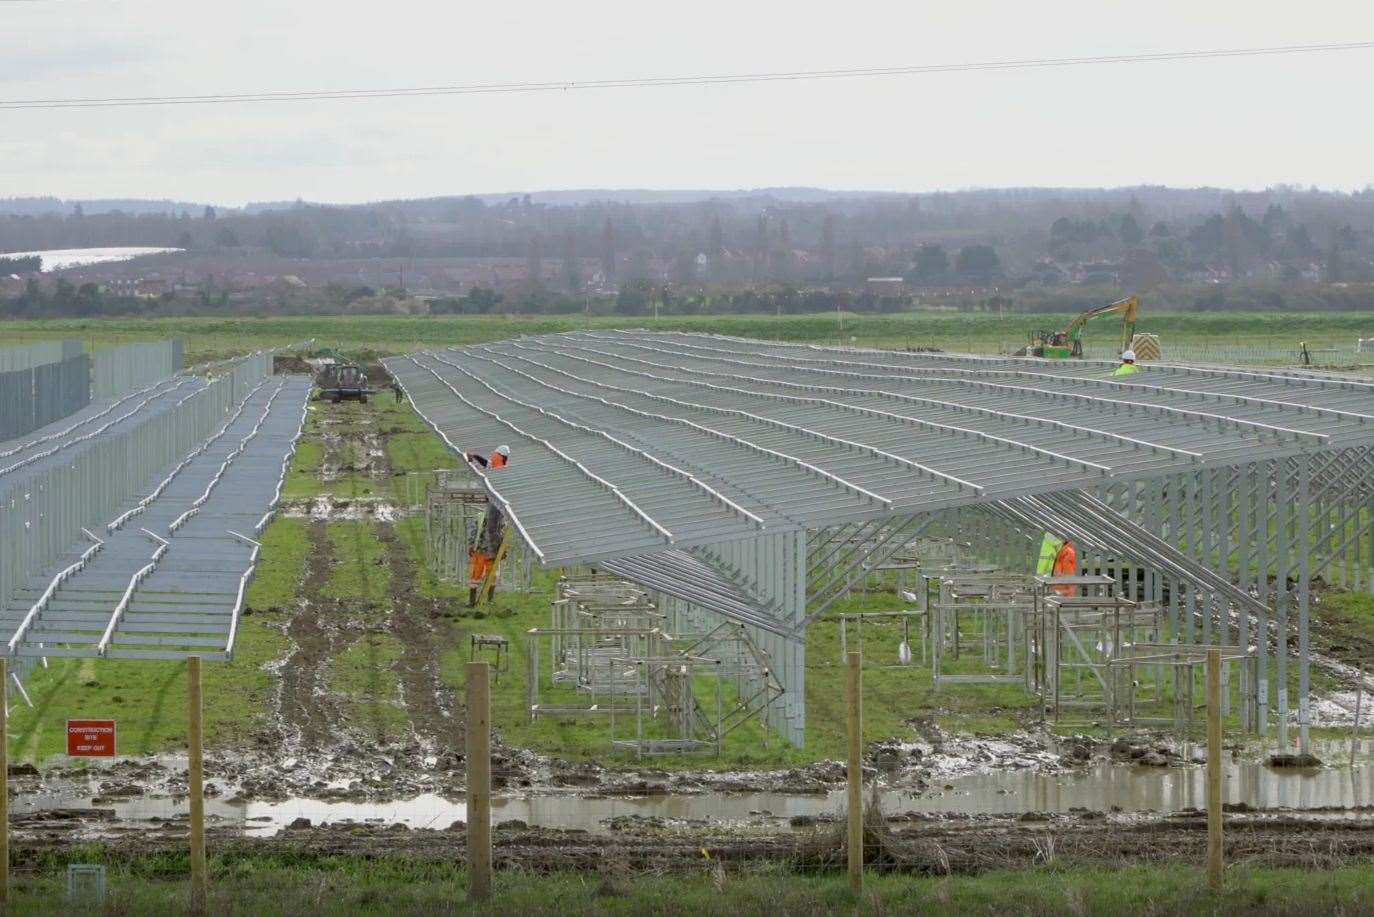 Work underway at the Cleve Hill Solar Park site in Graveney, between Faversham and Whitstable